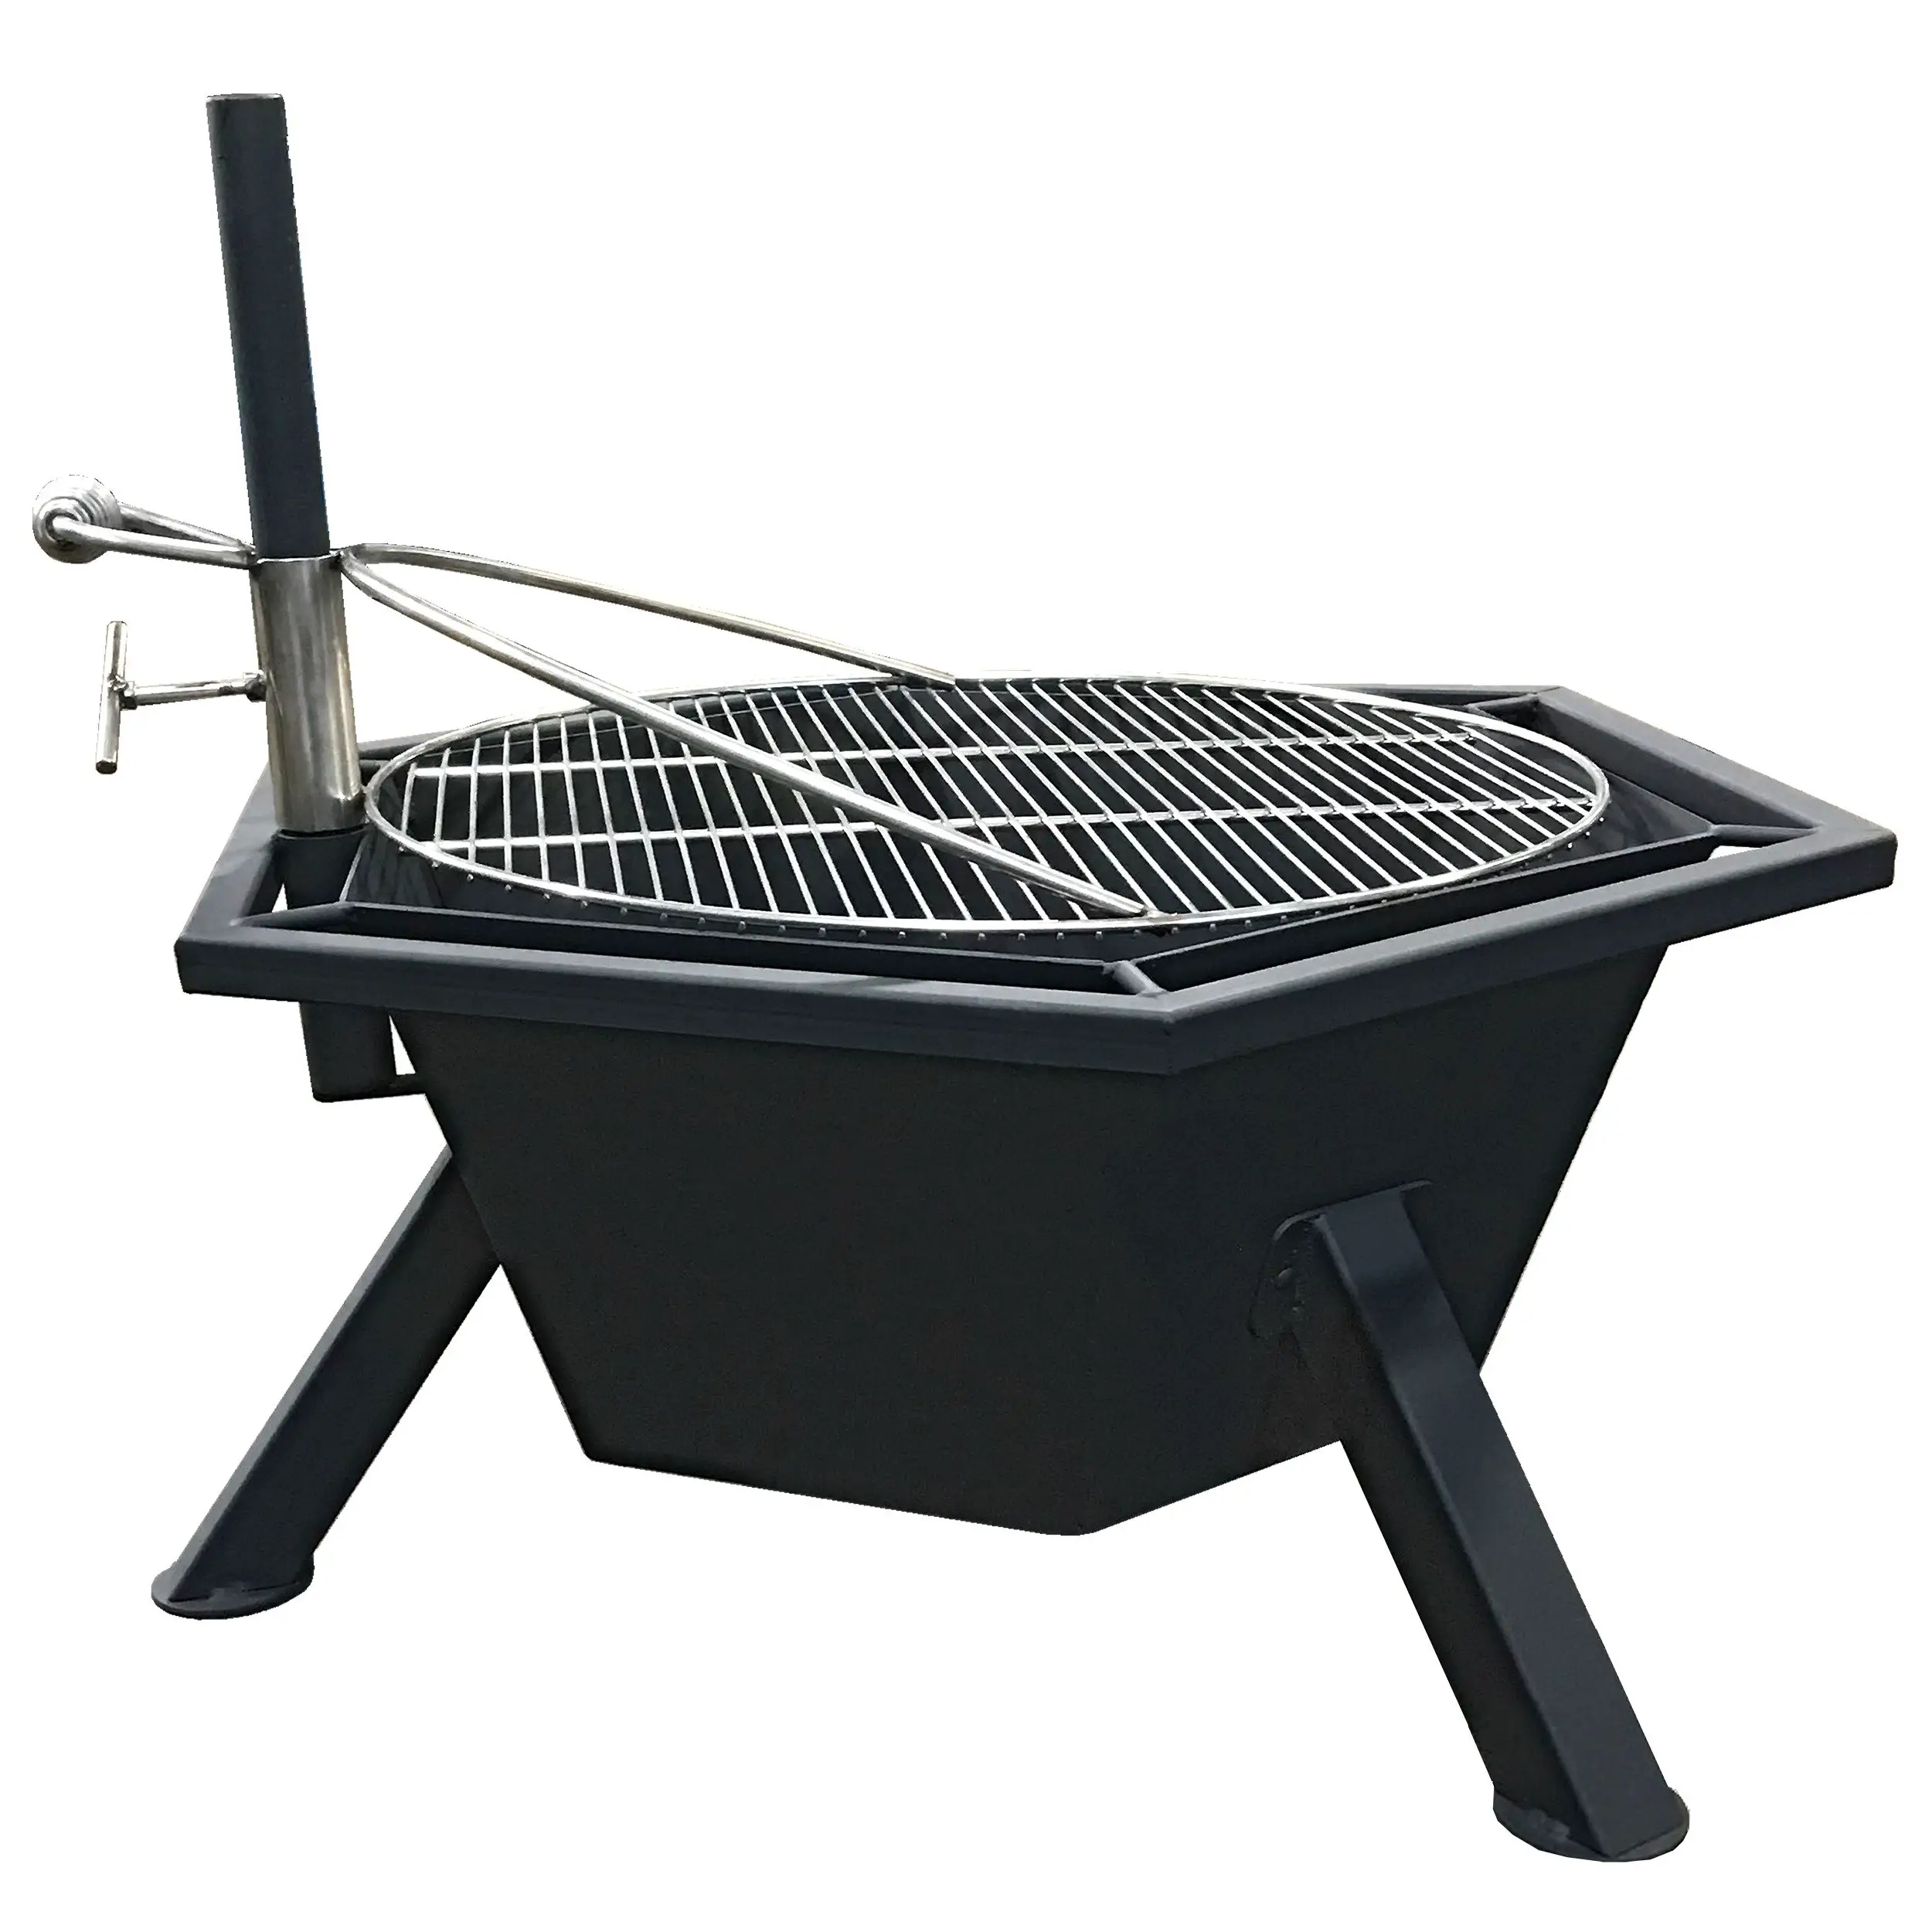 Fire Pit with Grill Attachment from DutchCrafters Amish Furniture